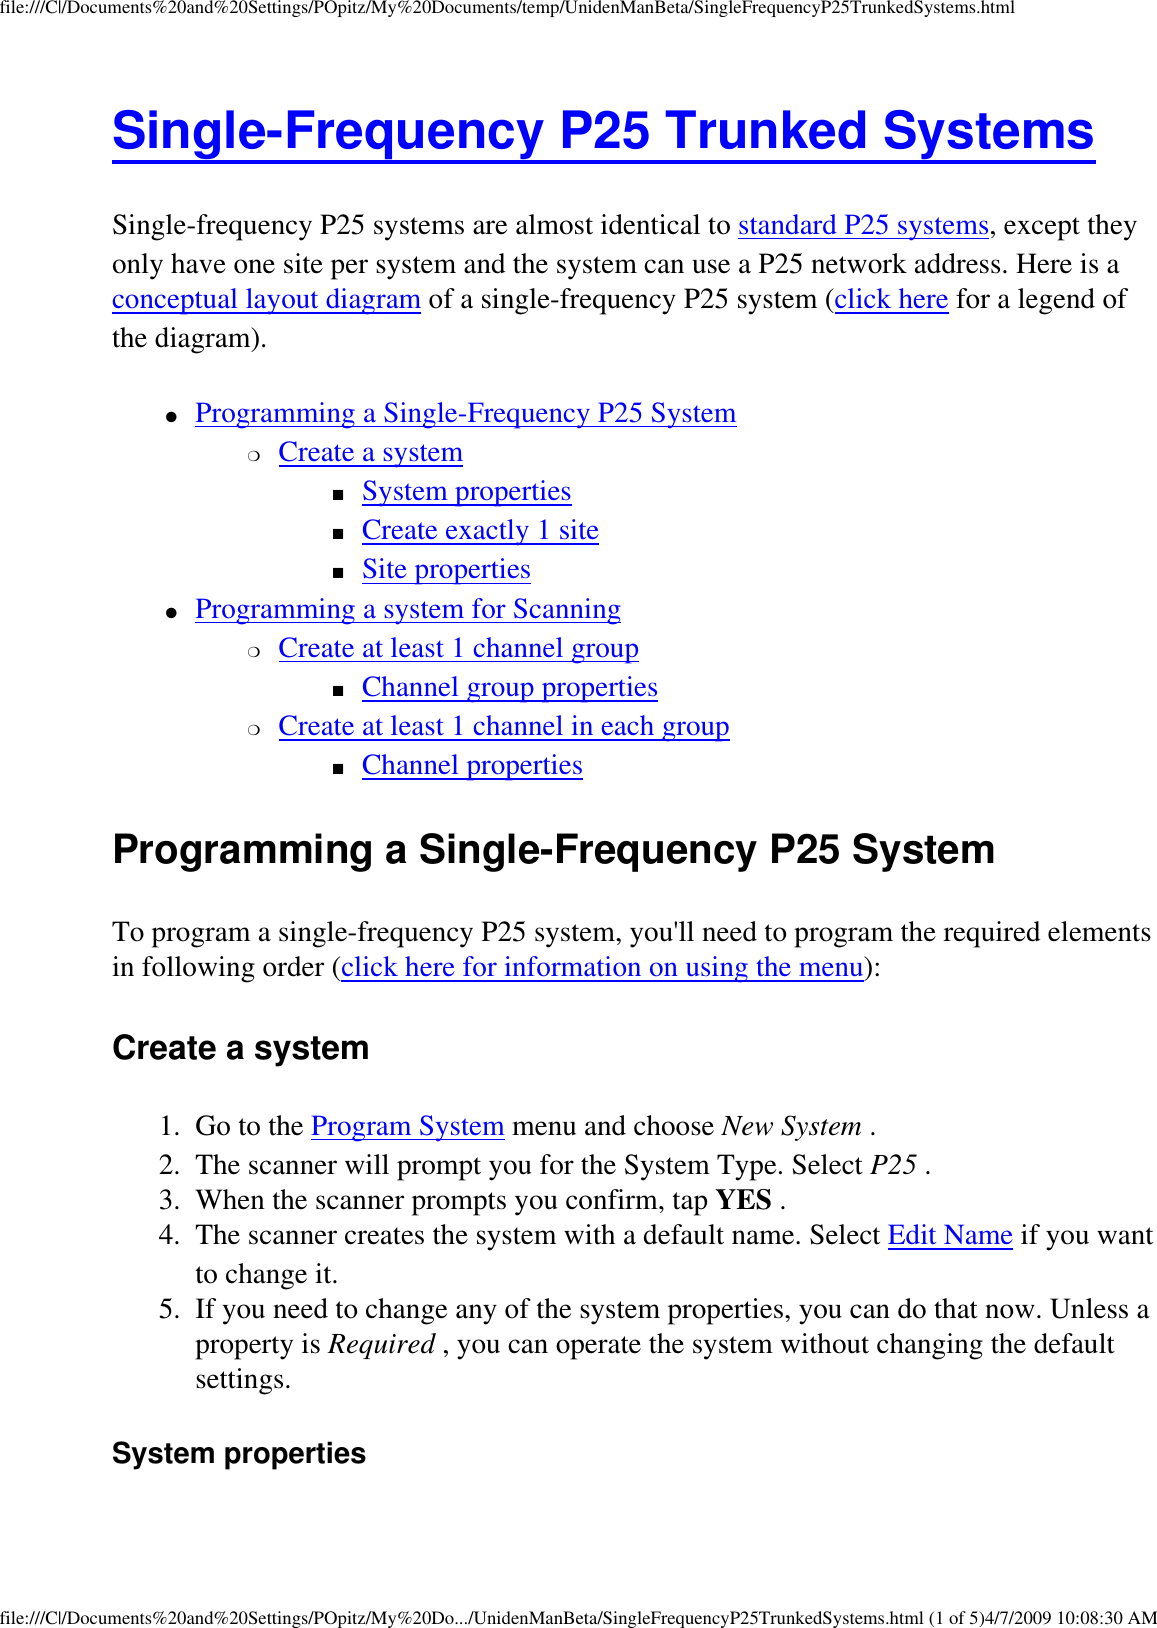 file:///C|/Documents%20and%20Settings/POpitz/My%20Documents/temp/UnidenManBeta/SingleFrequencyP25TrunkedSystems.htmlSingle-Frequency P25 Trunked Systems Single-frequency P25 systems are almost identical to standard P25 systems, except they only have one site per system and the system can use a P25 network address. Here is a conceptual layout diagram of a single-frequency P25 system (click here for a legend of the diagram). ●     Programming a Single-Frequency P25 System ❍     Create a system ■     System properties ■     Create exactly 1 site ■     Site properties ●     Programming a system for Scanning ❍     Create at least 1 channel group ■     Channel group properties ❍     Create at least 1 channel in each group ■     Channel properties Programming a Single-Frequency P25 System To program a single-frequency P25 system, you&apos;ll need to program the required elements in following order (click here for information on using the menu): Create a system 1.  Go to the Program System menu and choose New System . 2.  The scanner will prompt you for the System Type. Select P25 . 3.  When the scanner prompts you confirm, tap YES . 4.  The scanner creates the system with a default name. Select Edit Name if you want to change it. 5.  If you need to change any of the system properties, you can do that now. Unless a property is Required , you can operate the system without changing the default settings. System properties file:///C|/Documents%20and%20Settings/POpitz/My%20Do.../UnidenManBeta/SingleFrequencyP25TrunkedSystems.html (1 of 5)4/7/2009 10:08:30 AM